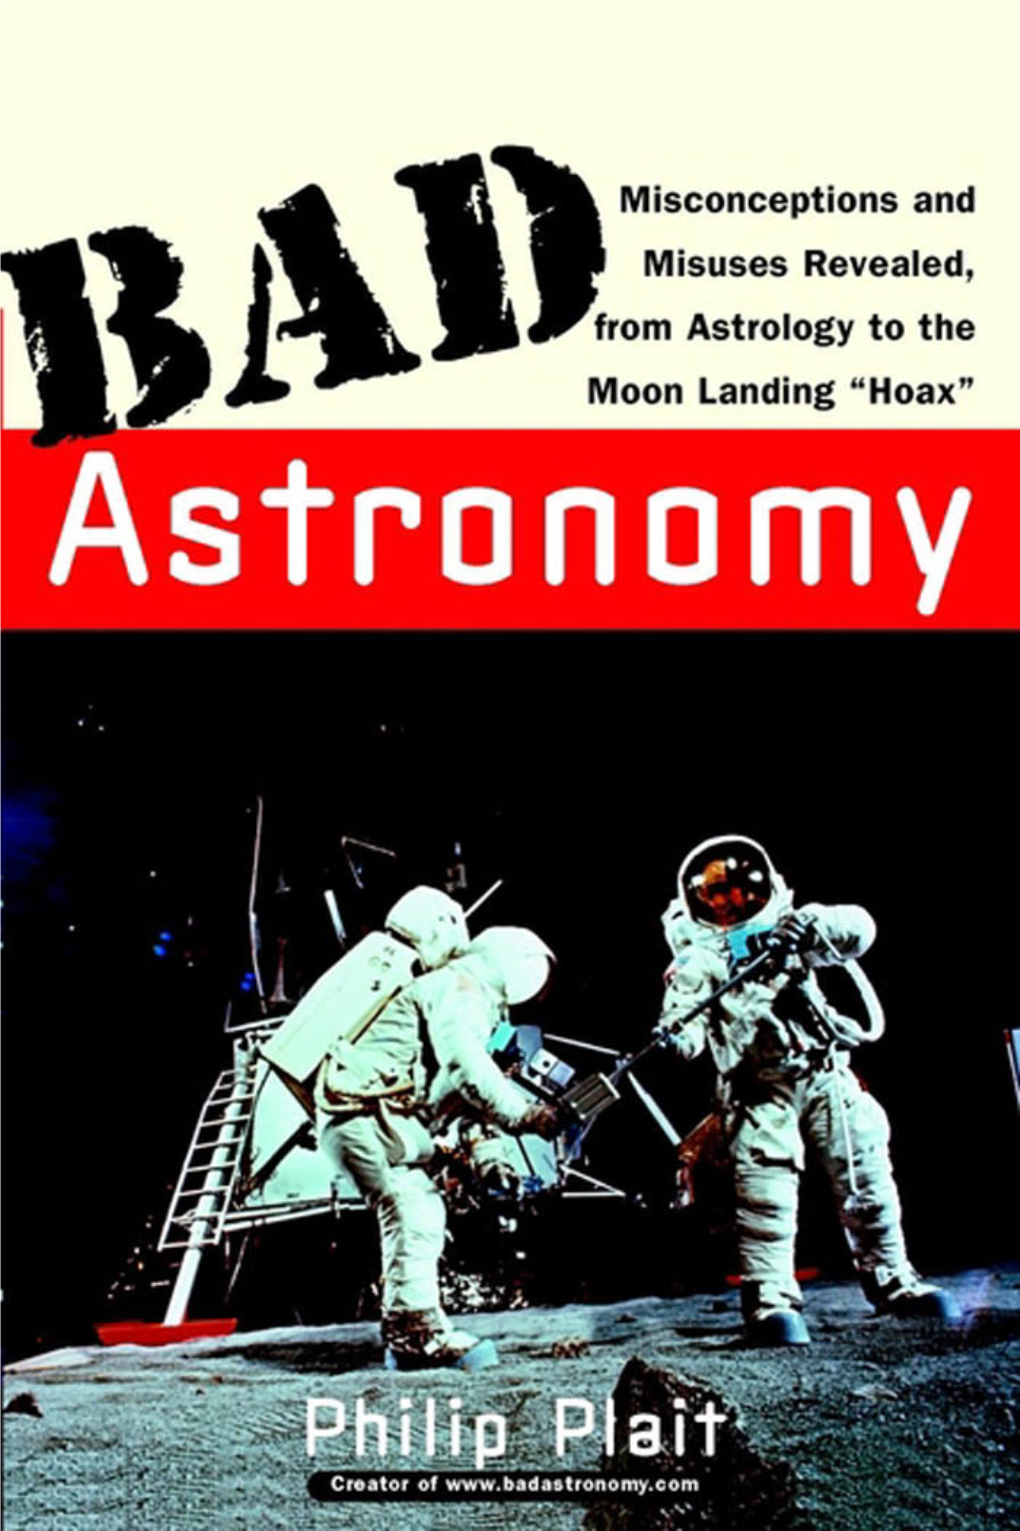 Bad Astronomy: Misconceptions and Misuses Revealed, from Astrology